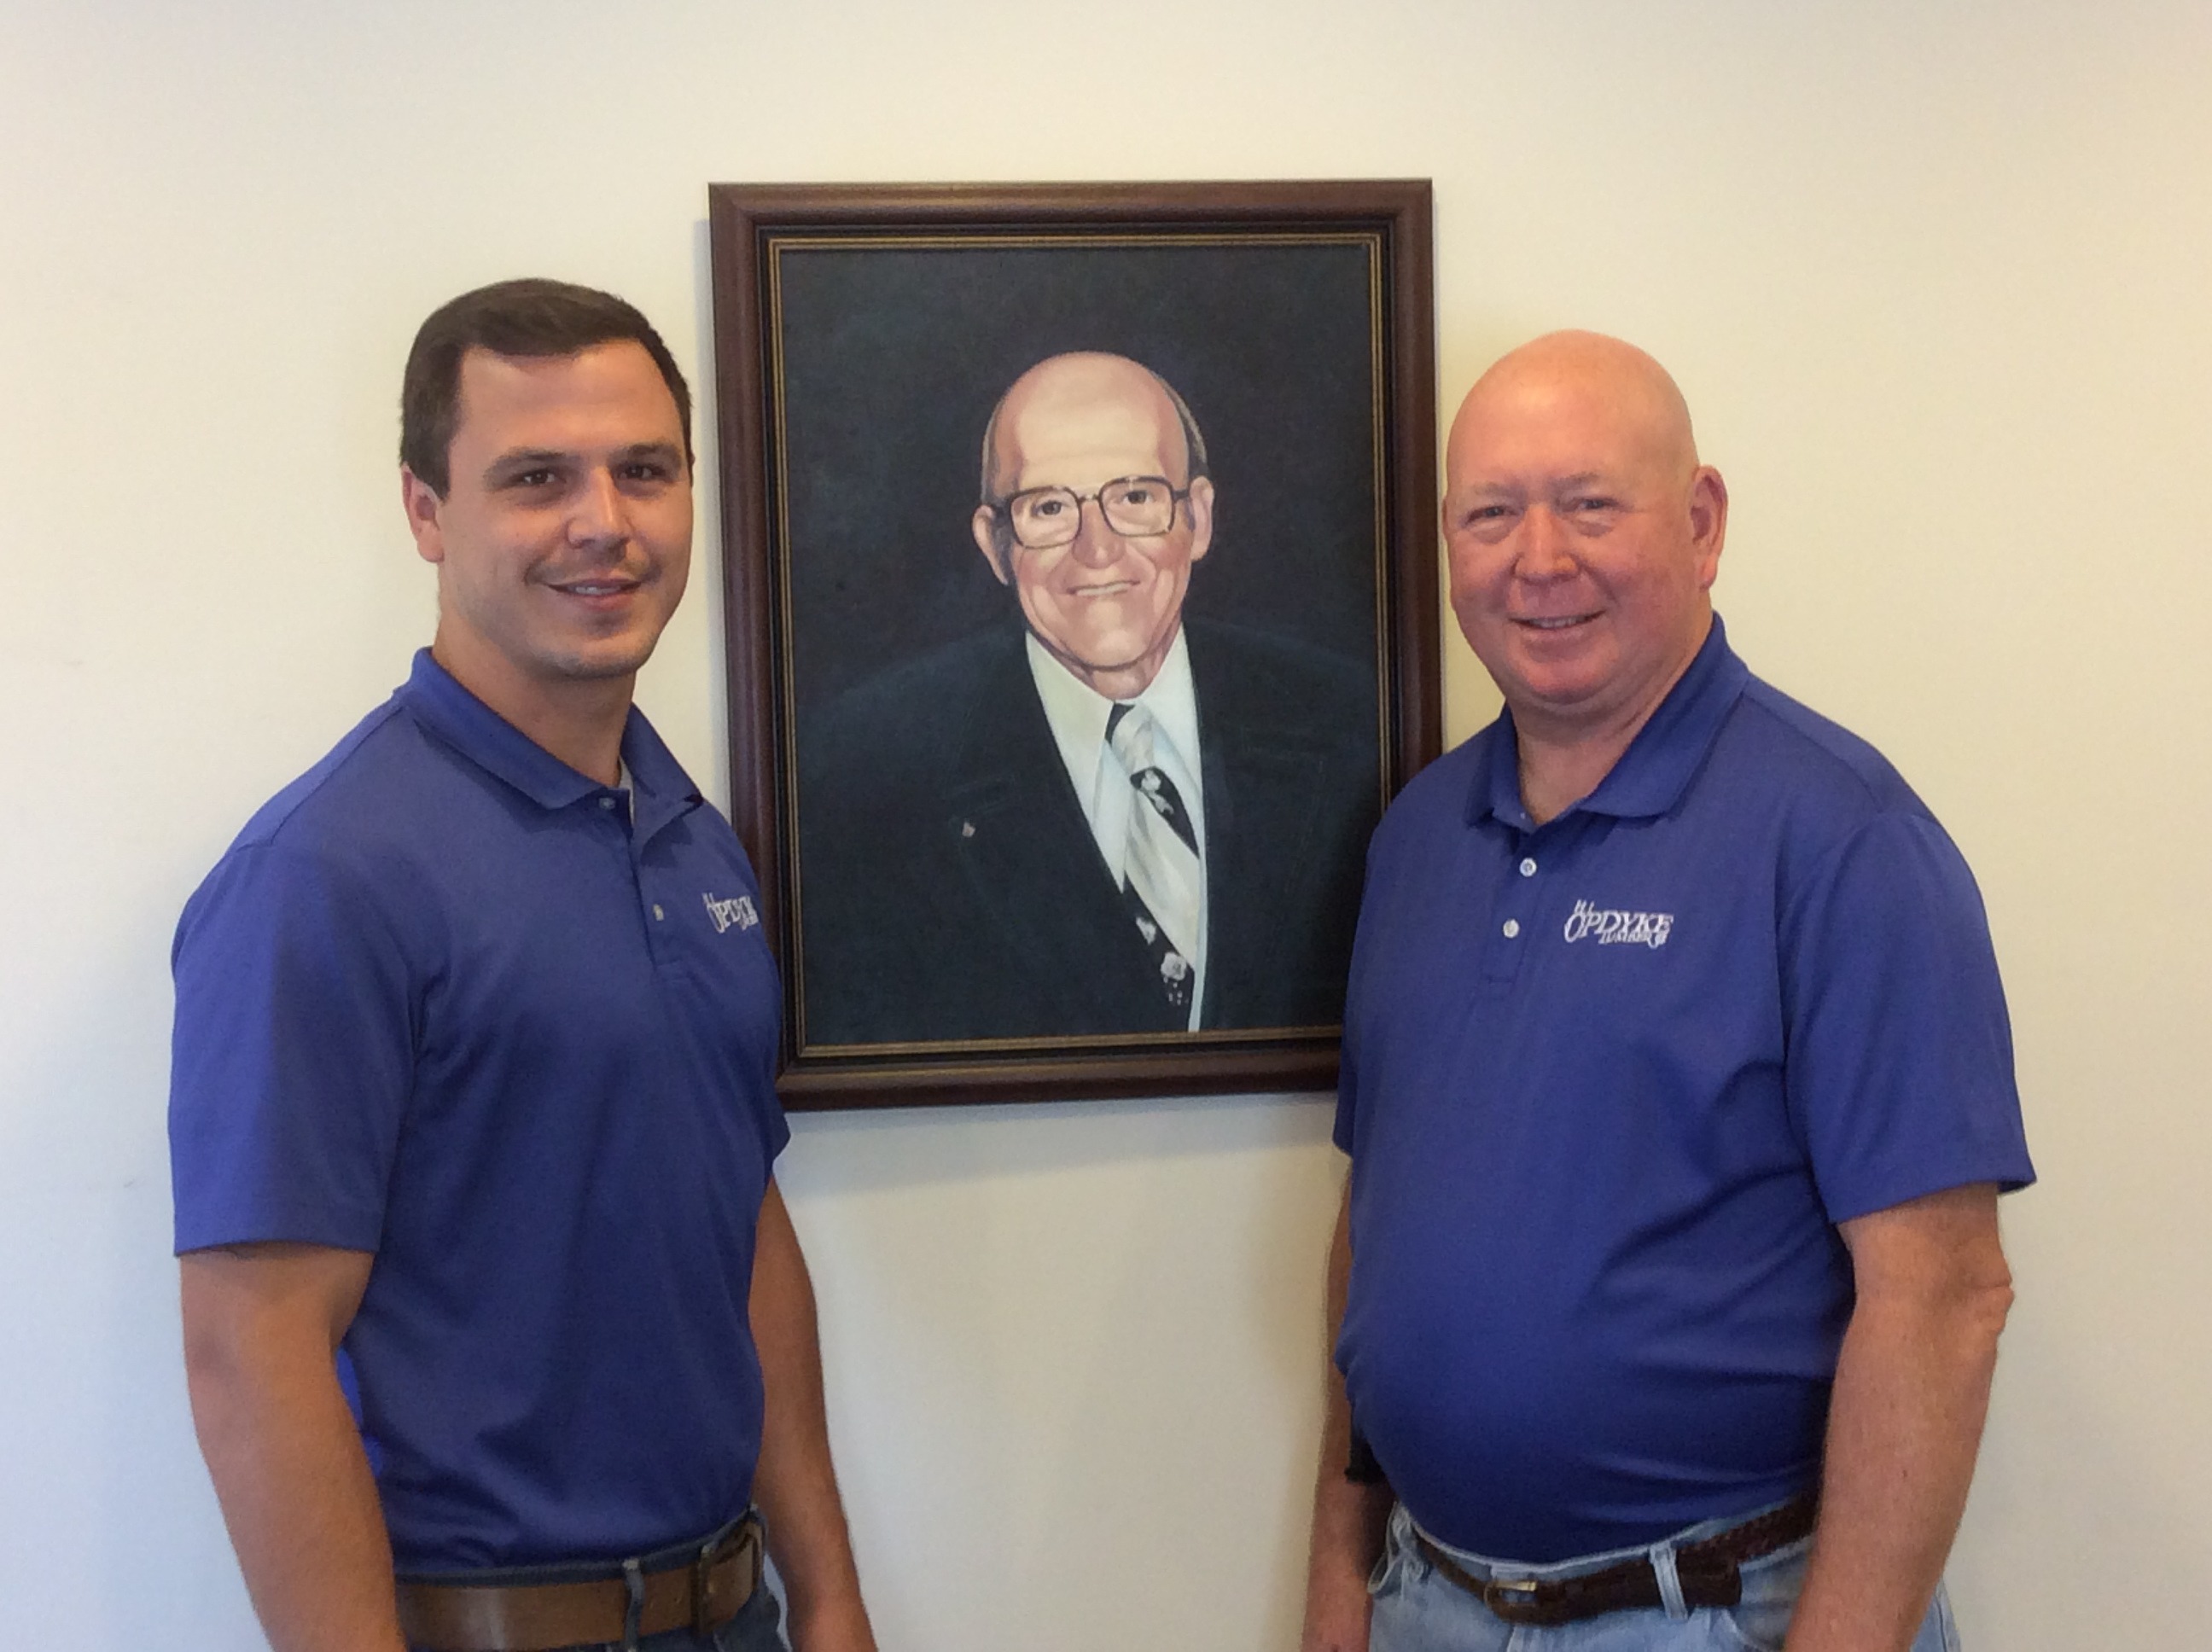 Current owner Jack Opdyke, his son and a portrait of the founder of H.J. Opdyke Lumber Company.